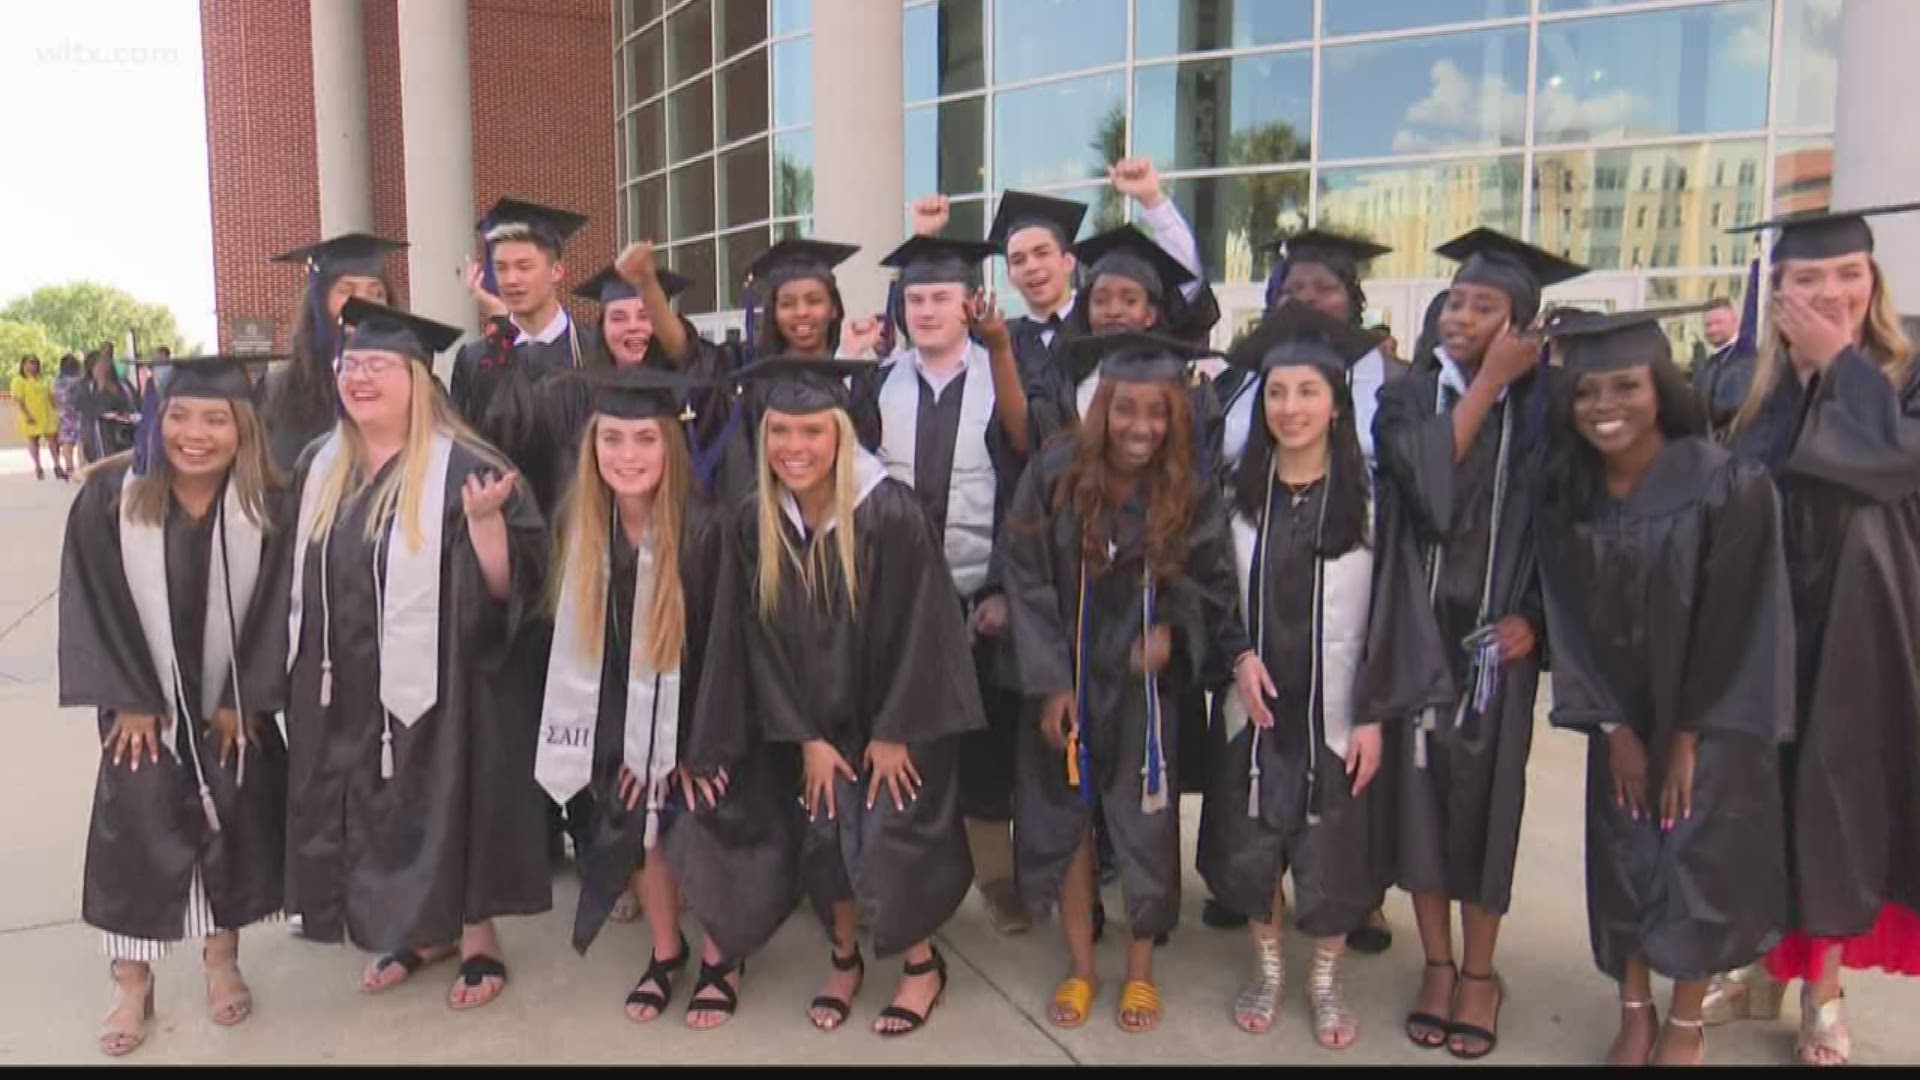 At the Midlands Tech graduation ceremony this evening, college students celebrated their big milestone and walked the stage.  Alongside the college seniors were 24 high school students.